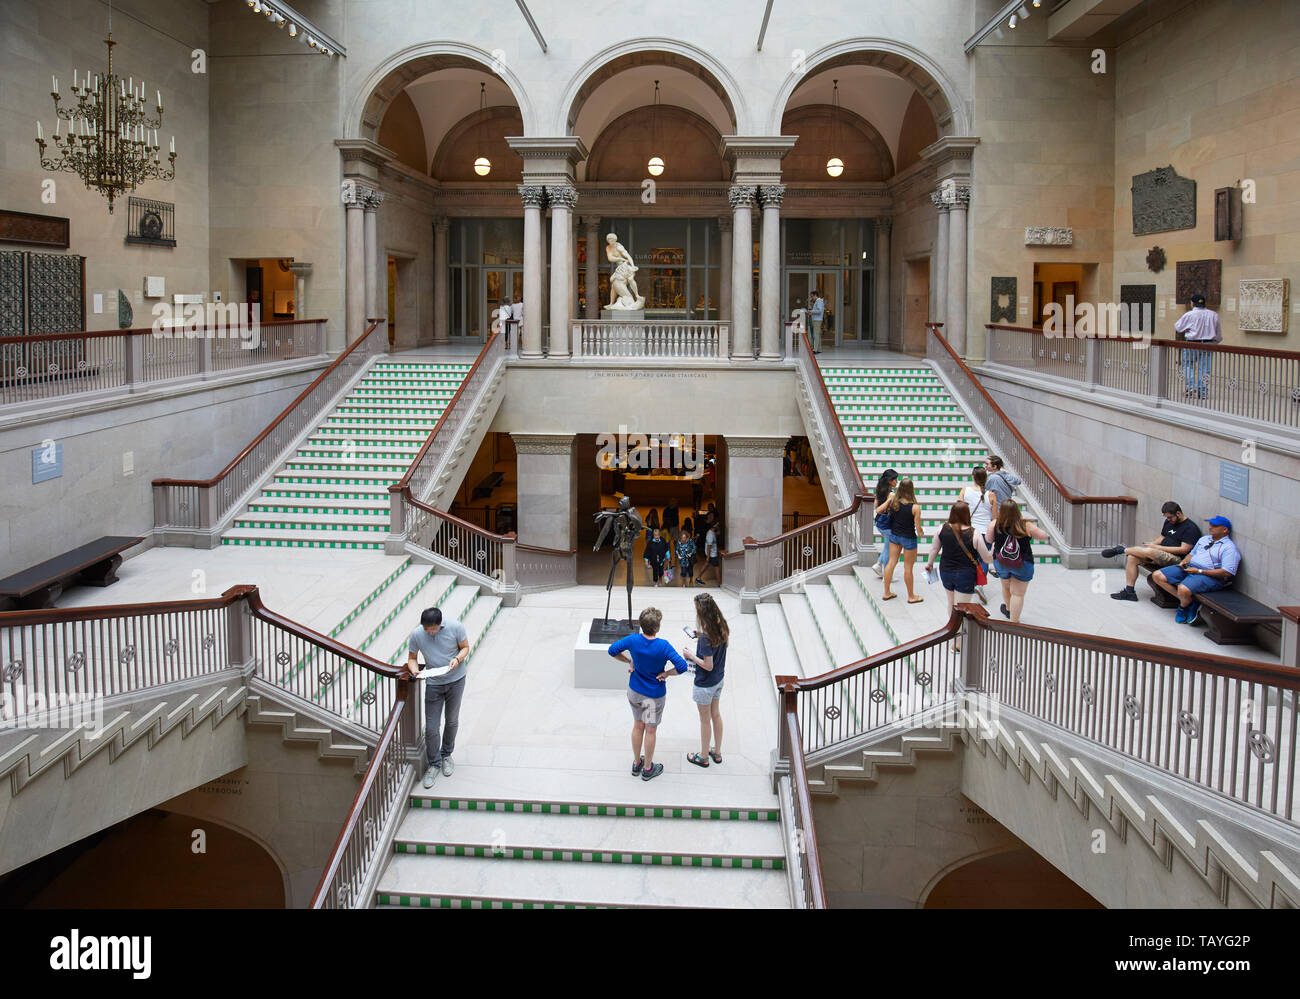 Interior view of the Art Institute of Chicago, Illinois, United States Stock Photo